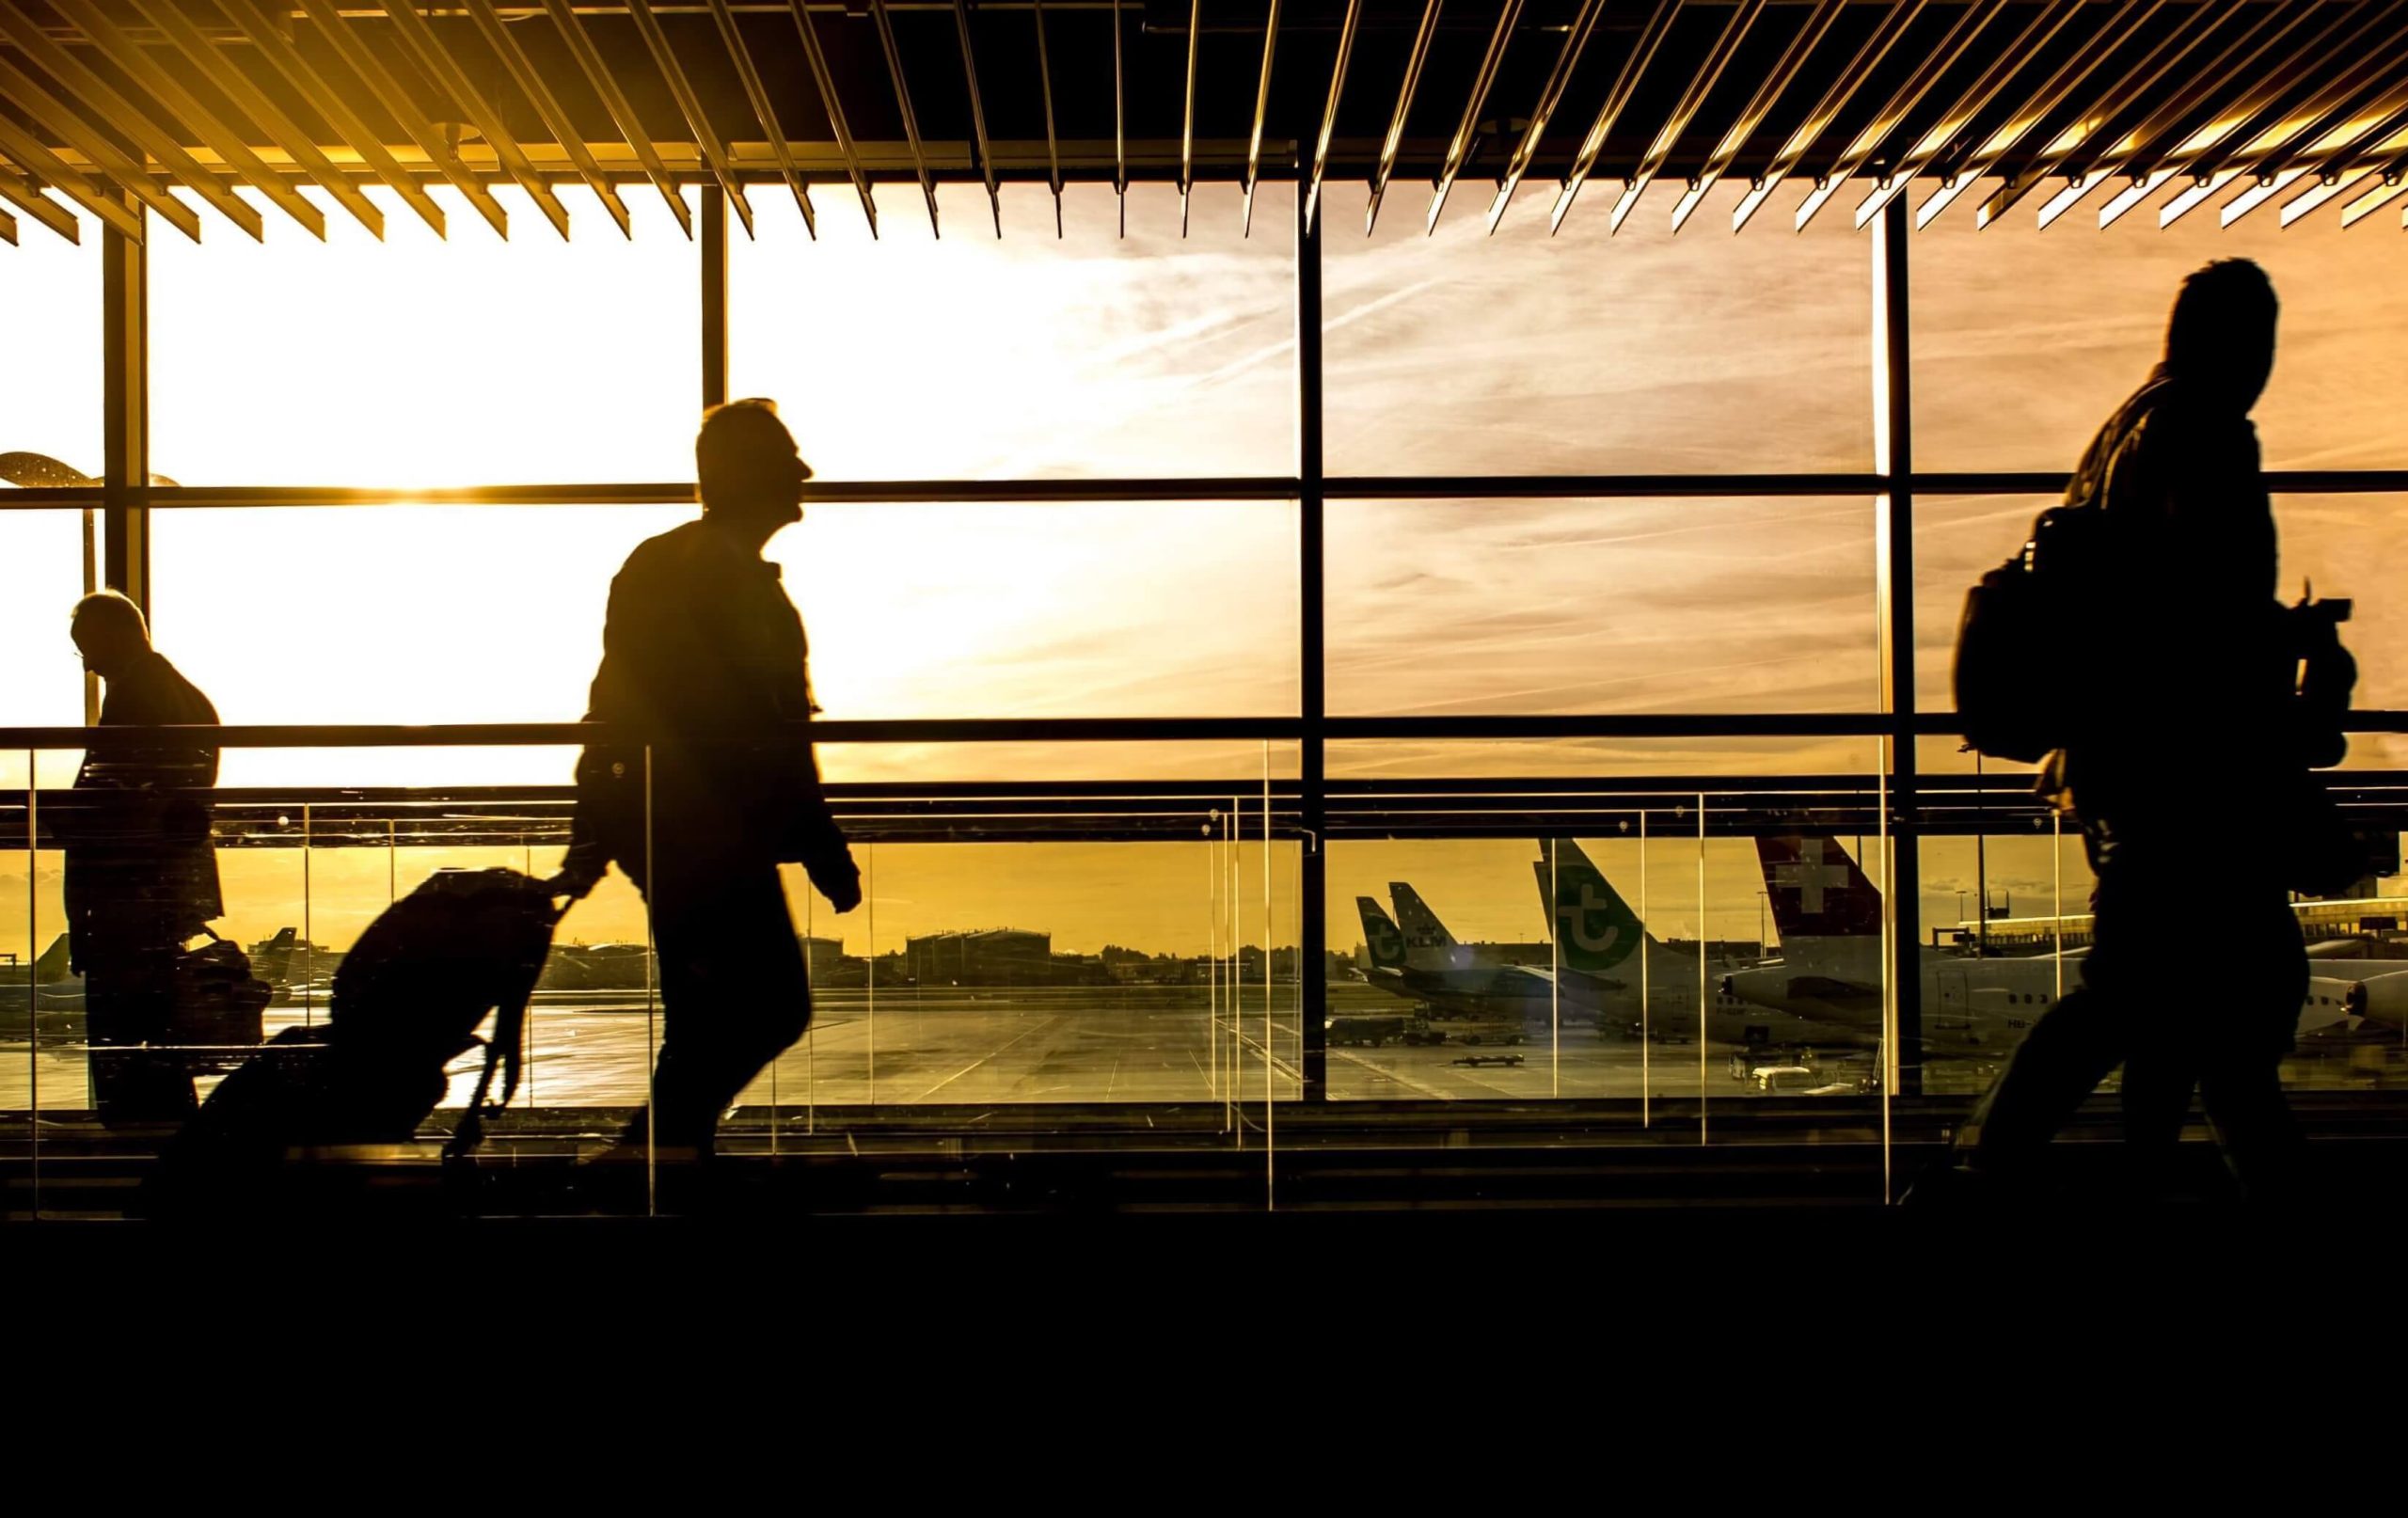 Silhouettes of people at the airport